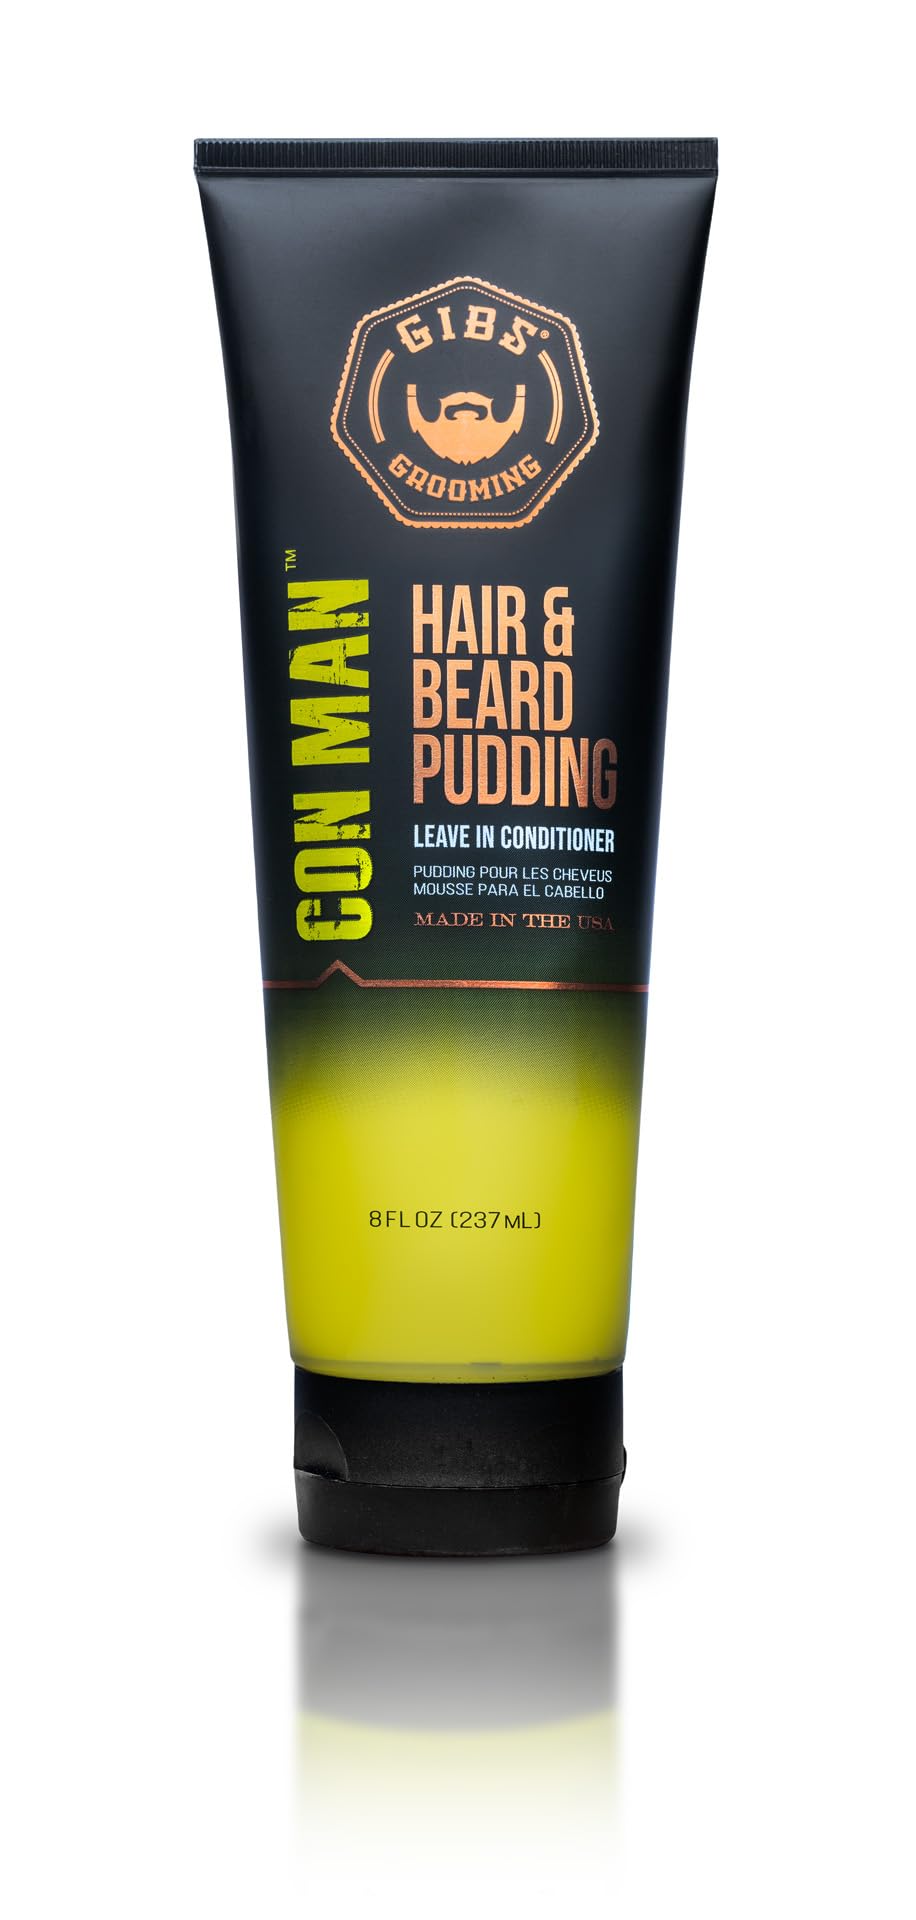 GIBS Con Man Hair and Beard Pudding, Leave In Conditioner, Curl Definer, Moisturizing, 8 oz tube